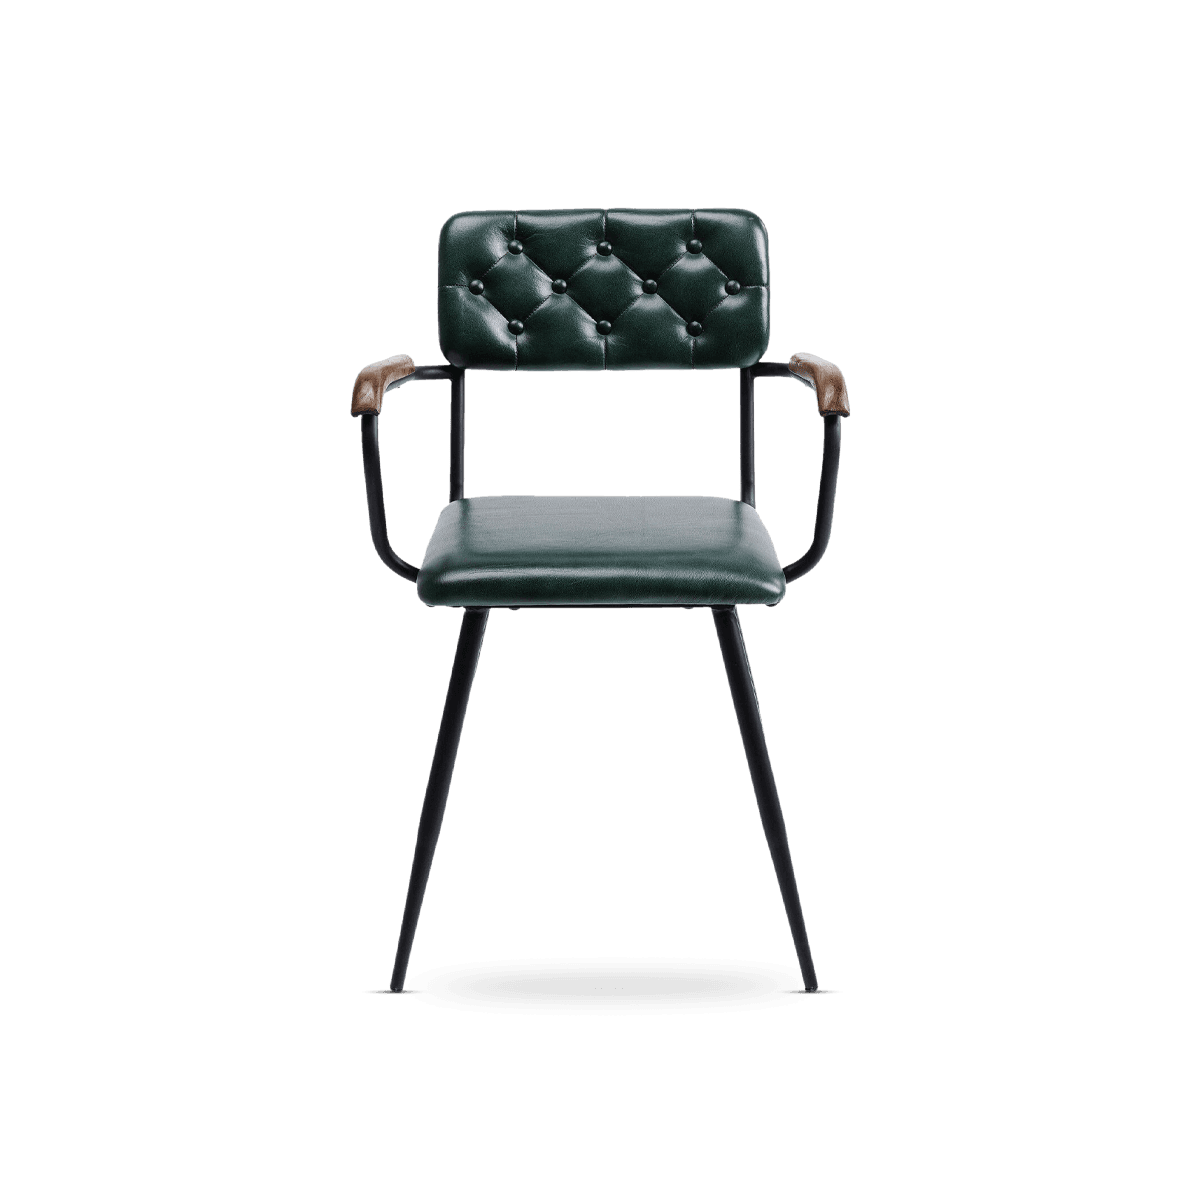 Dining Chair with Arm Rest Salsa Leather, Dark Green